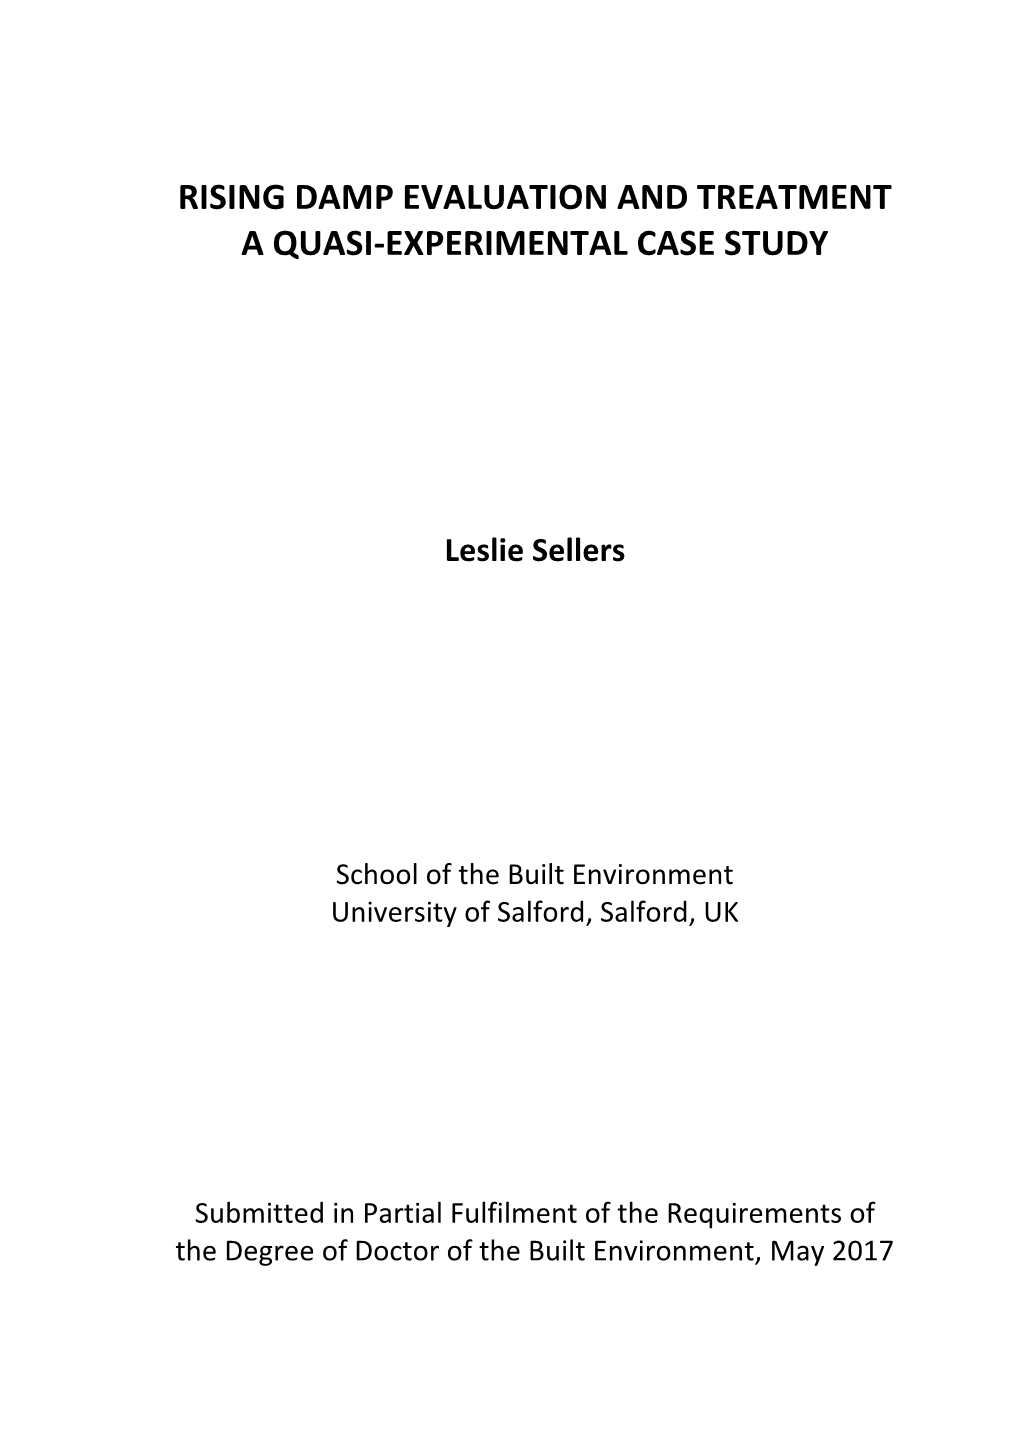 Rising Damp Evaluation and Treatment a Quasi-Experimental Case Study